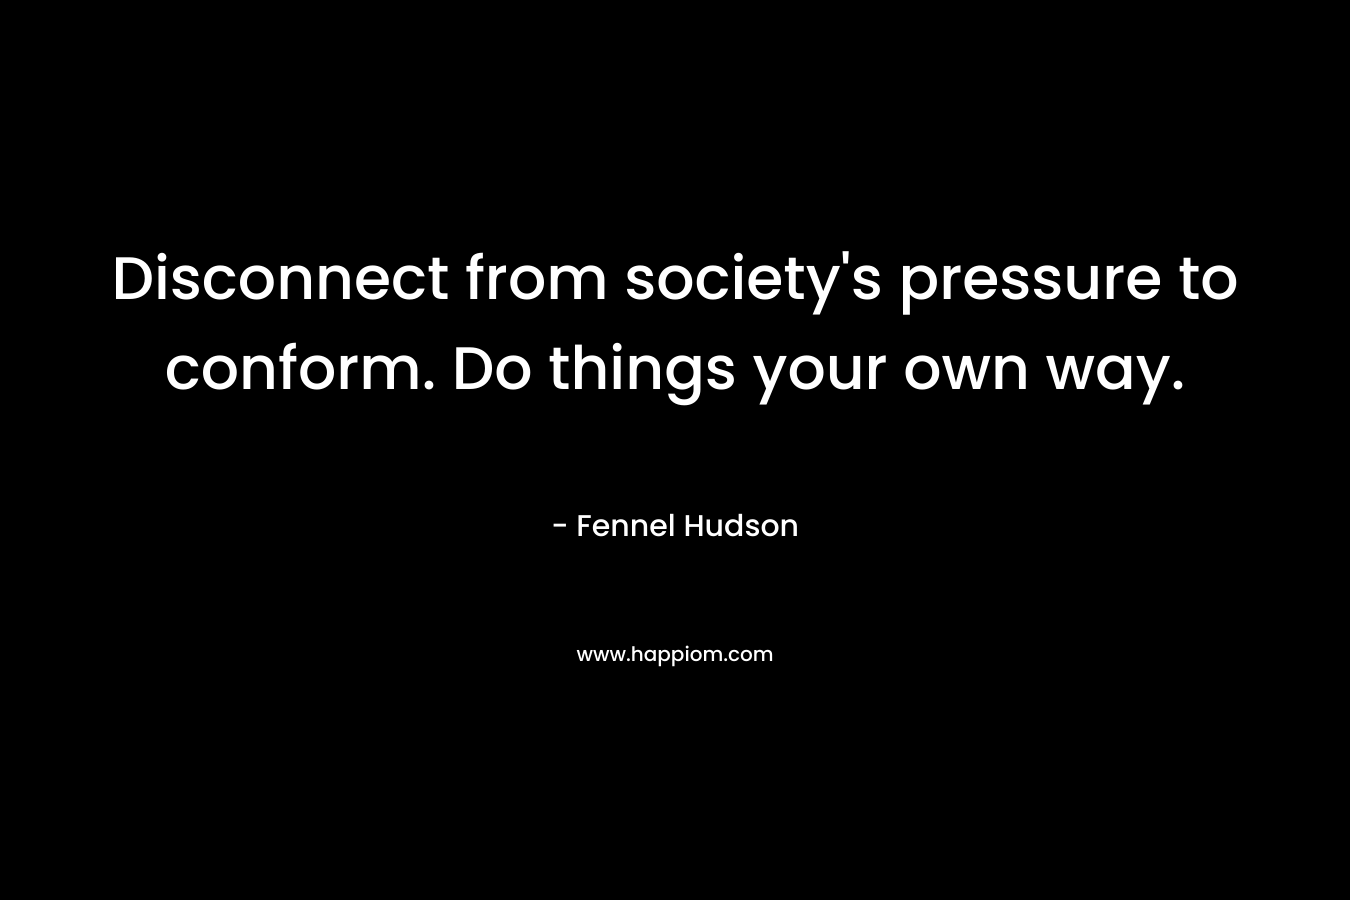 Disconnect from society's pressure to conform. Do things your own way.